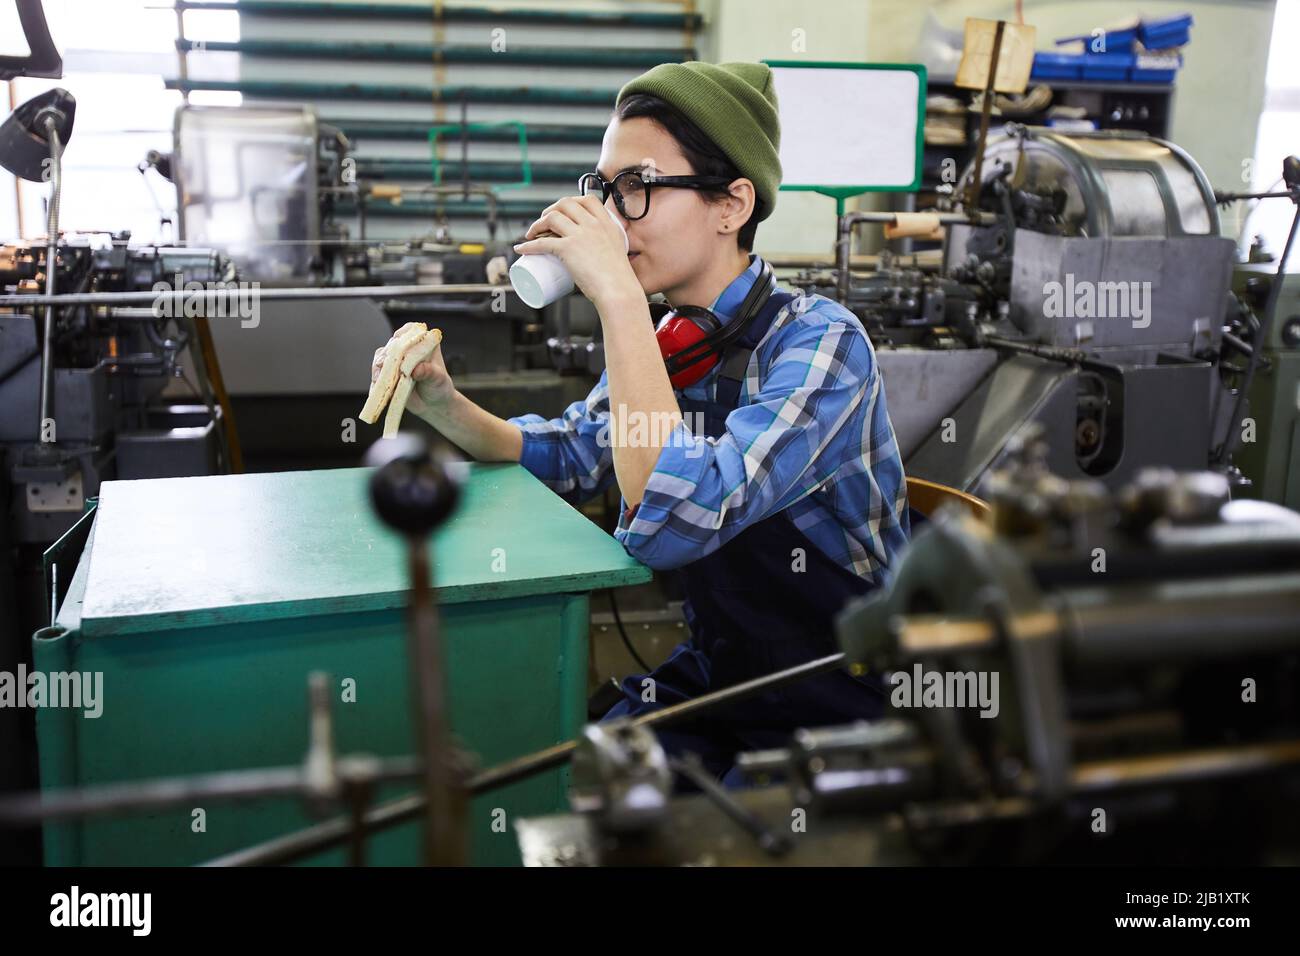 Content relaxed young woman in workwear drinking takeout coffee and eating sandwich at factory workplace Stock Photo